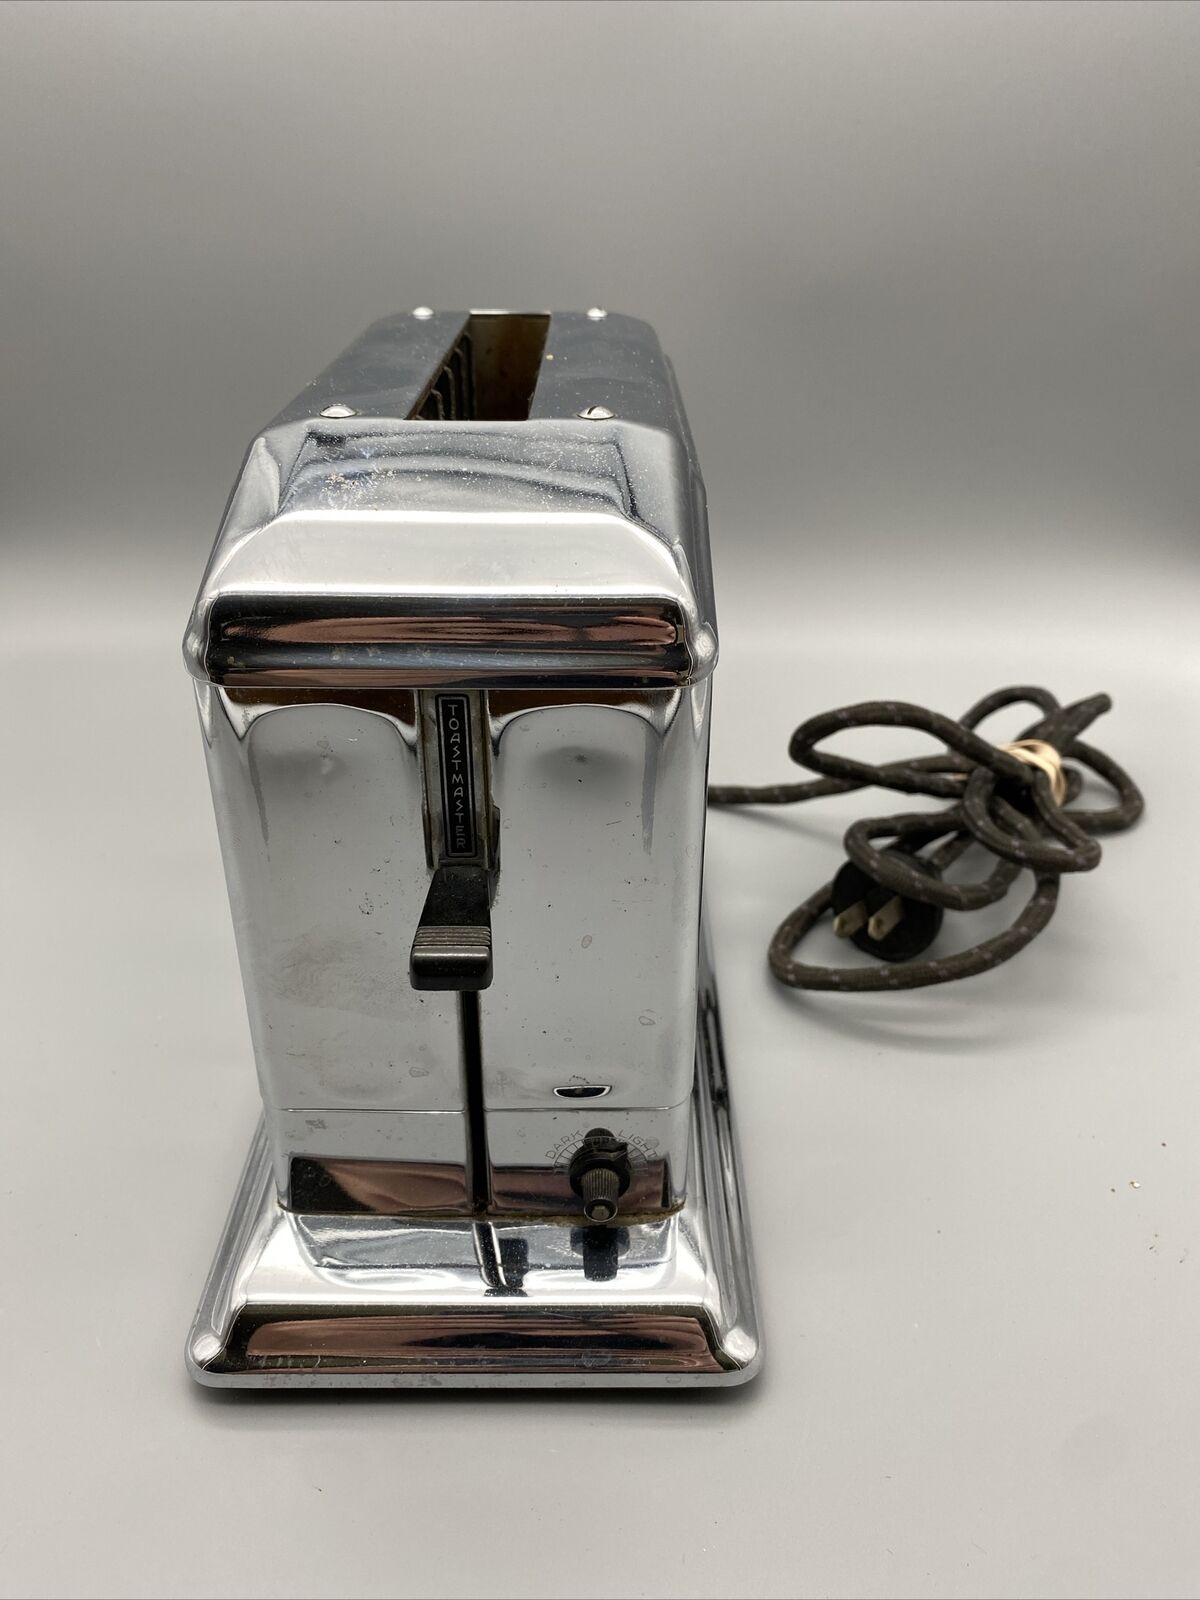 Toastmaster Chrome Toaster 1A2 Made in USA Vintage WORKS - CORD IS FRAYED